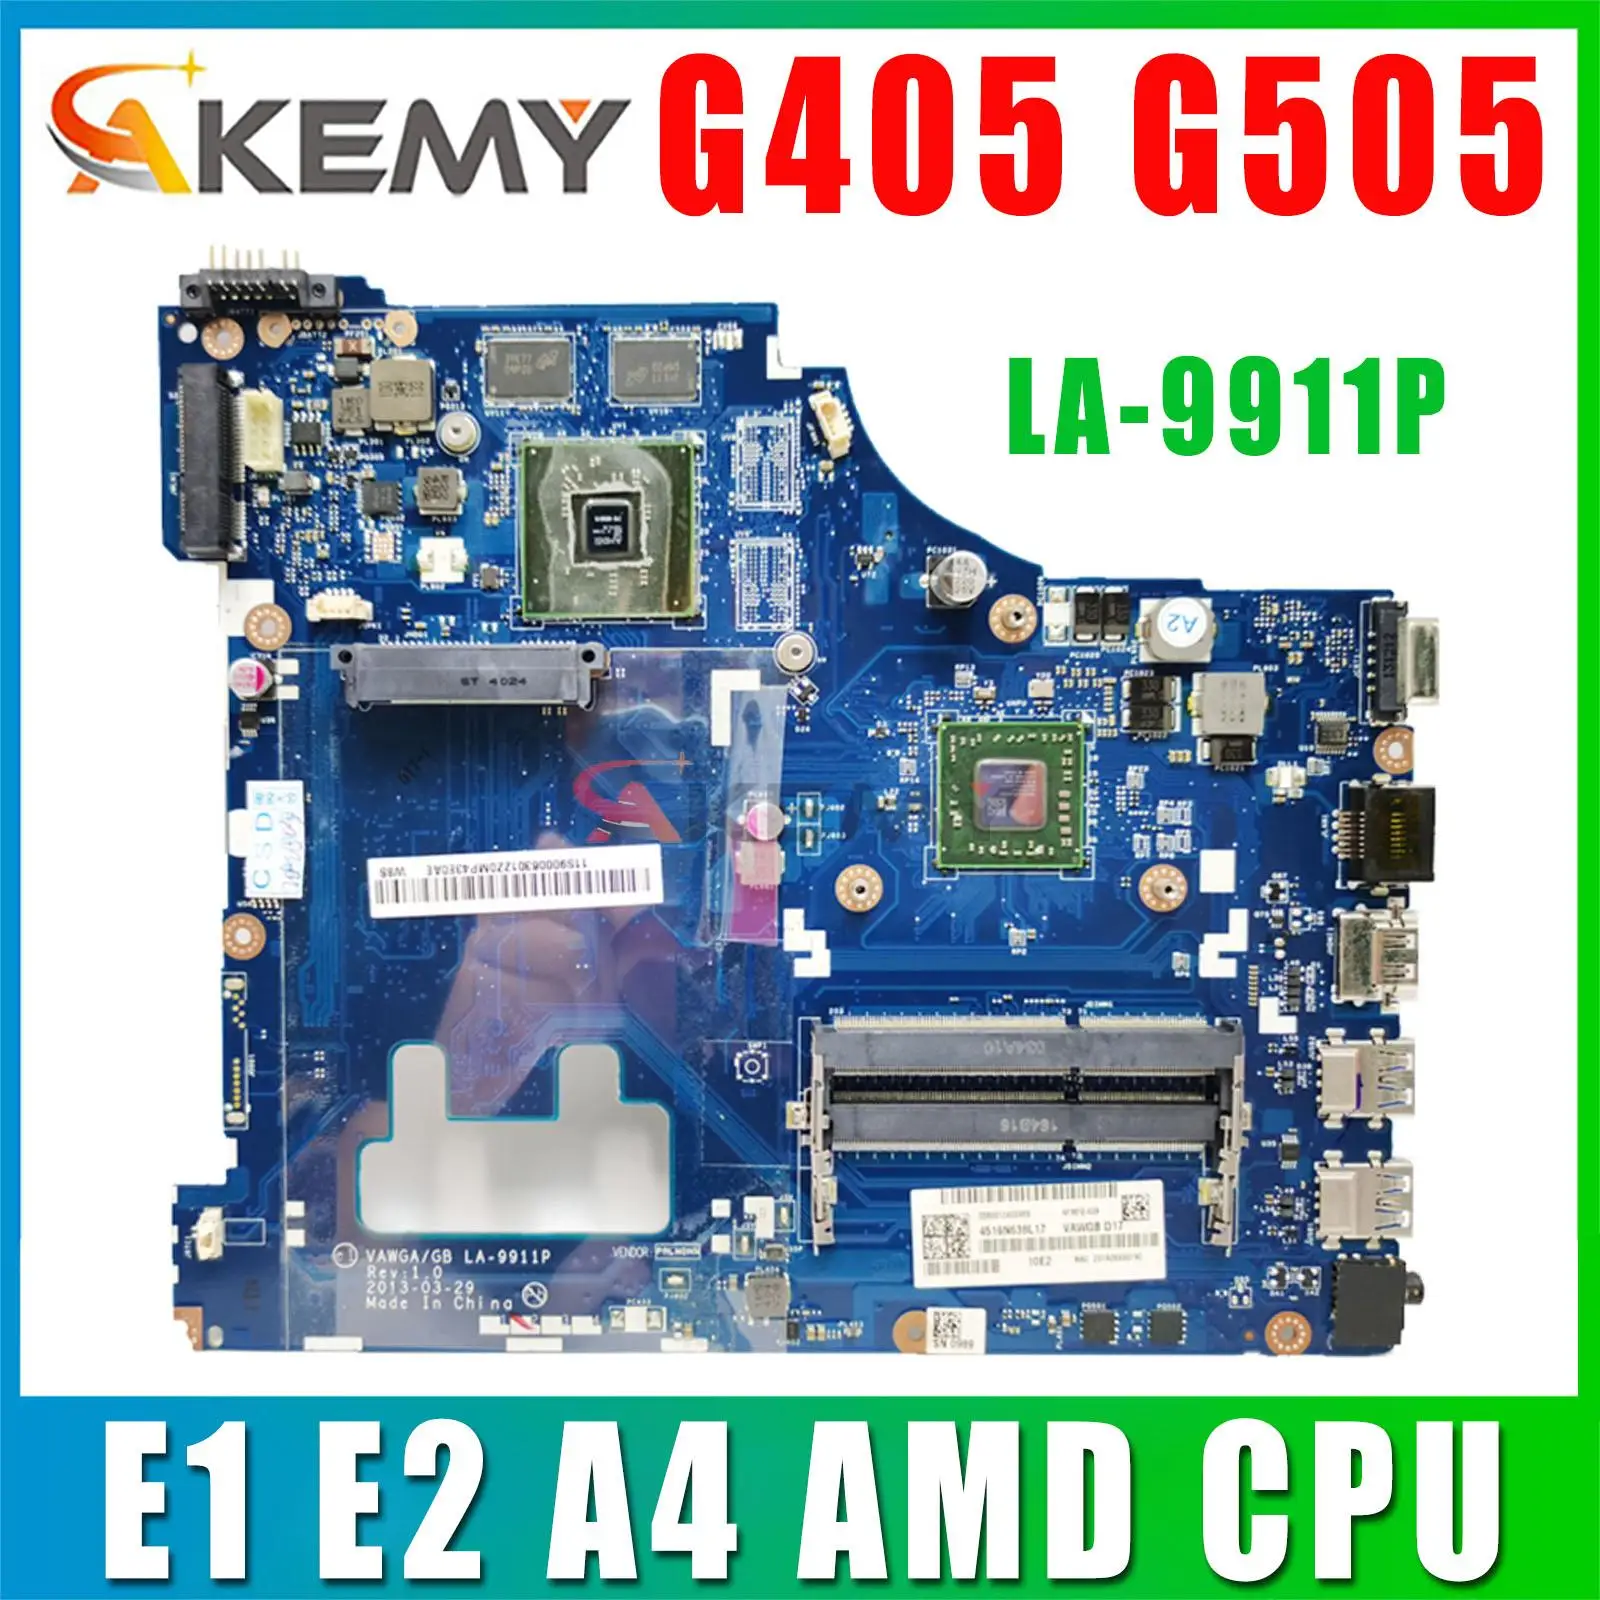 

VAWGA/GB LA-9911P motherboard.For Lenovo G405 G505 notebook motherboard With E1 E2 A4 AMD CPU .DDR3 100% test work